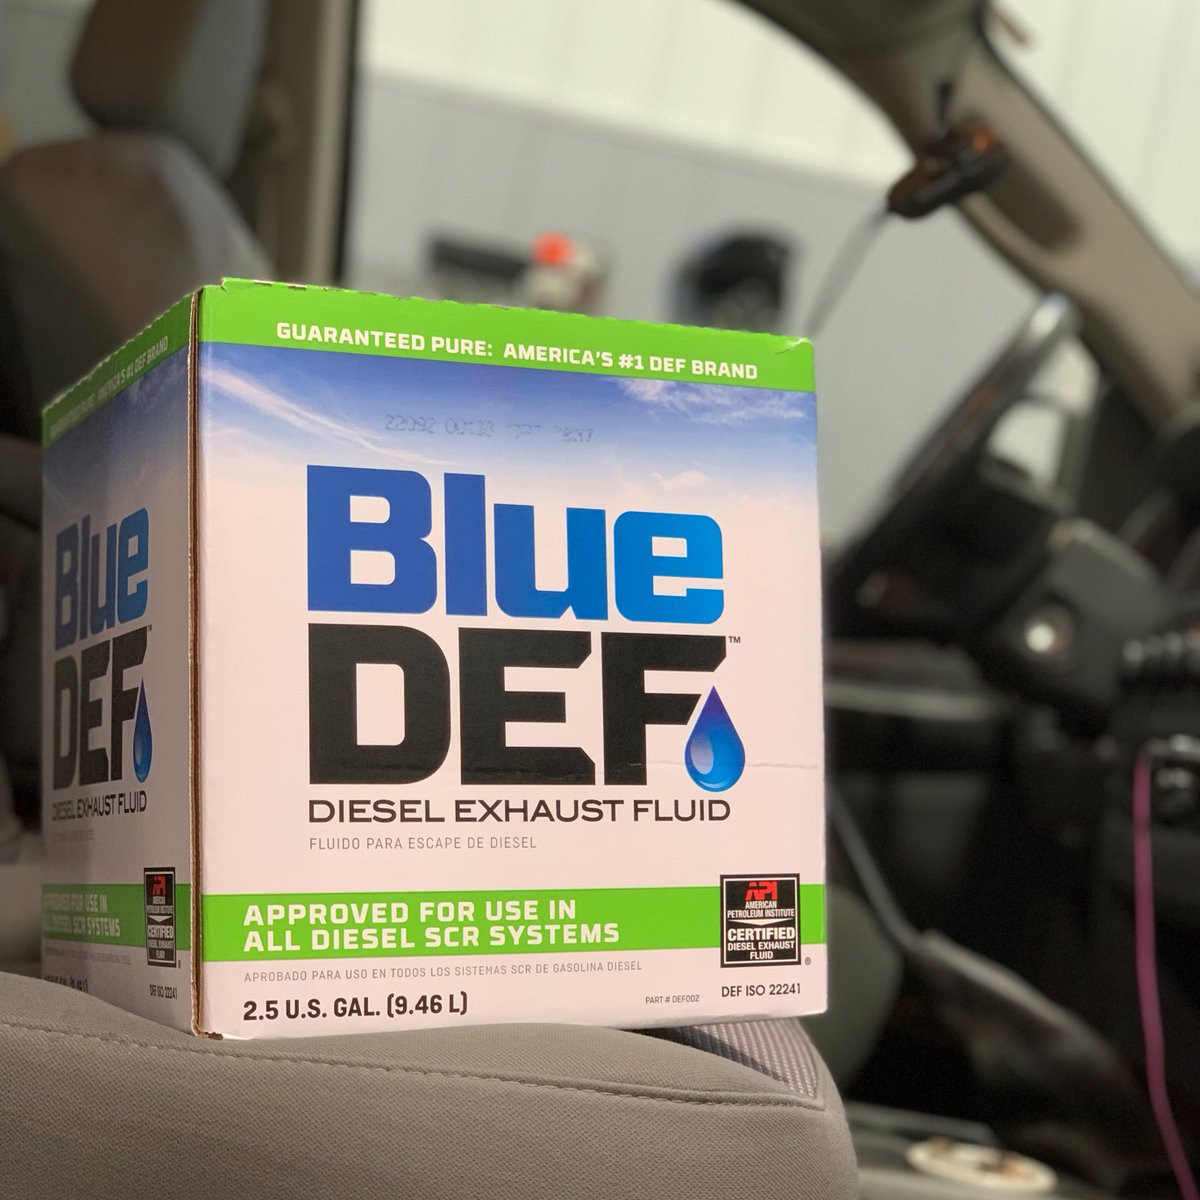 Wherever your journey takes you, #BlueDEF is always by your side.